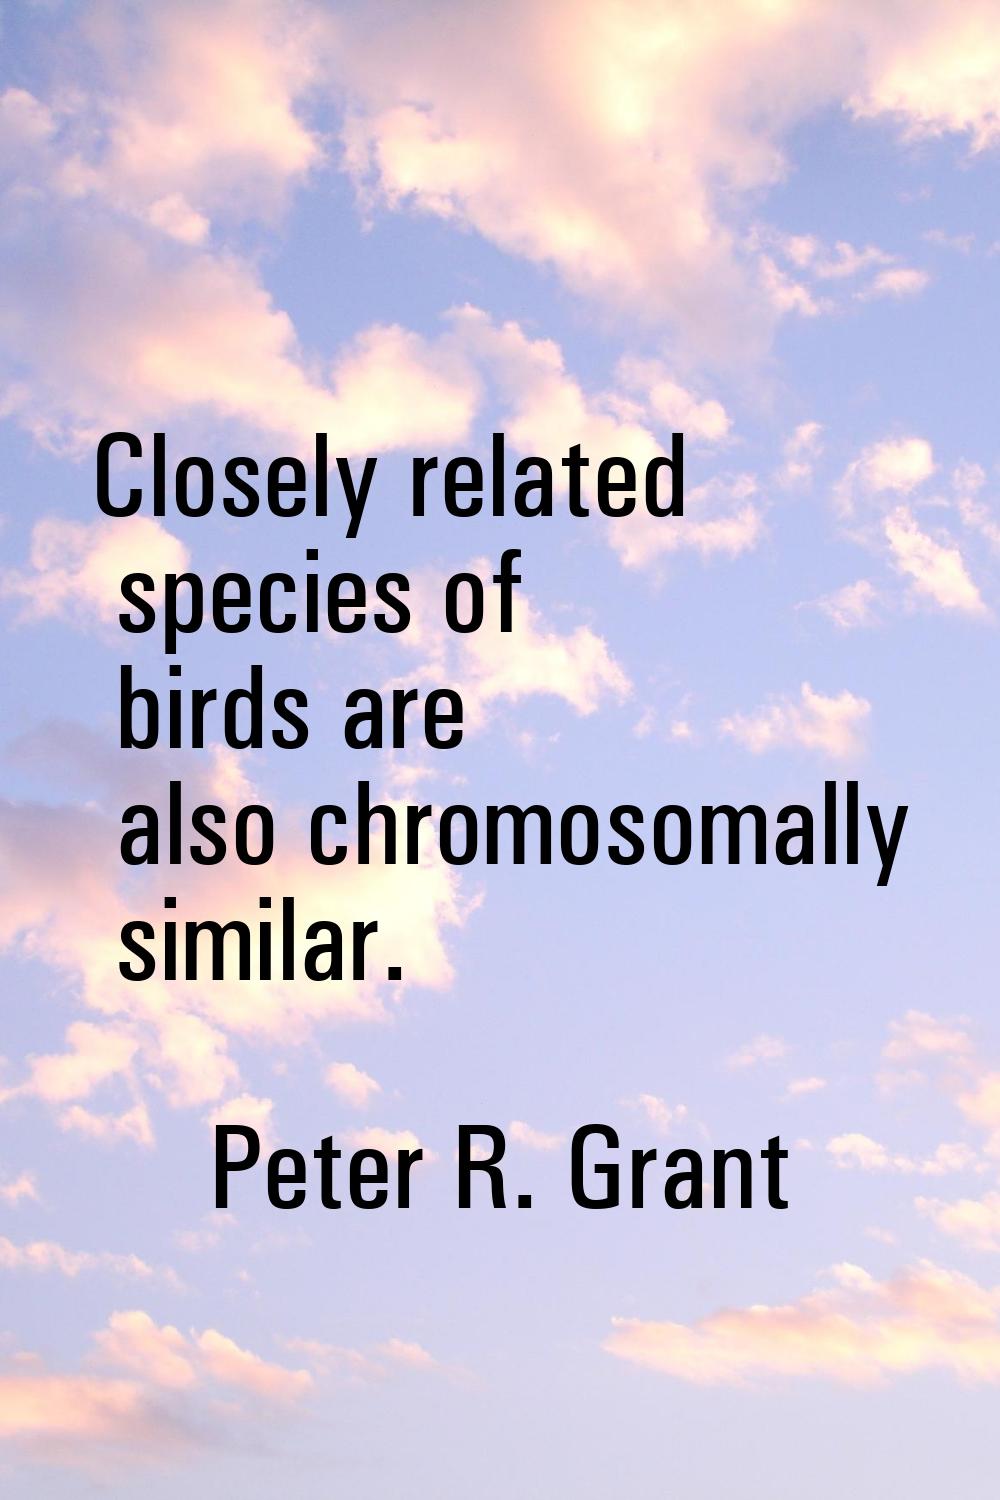 Closely related species of birds are also chromosomally similar.